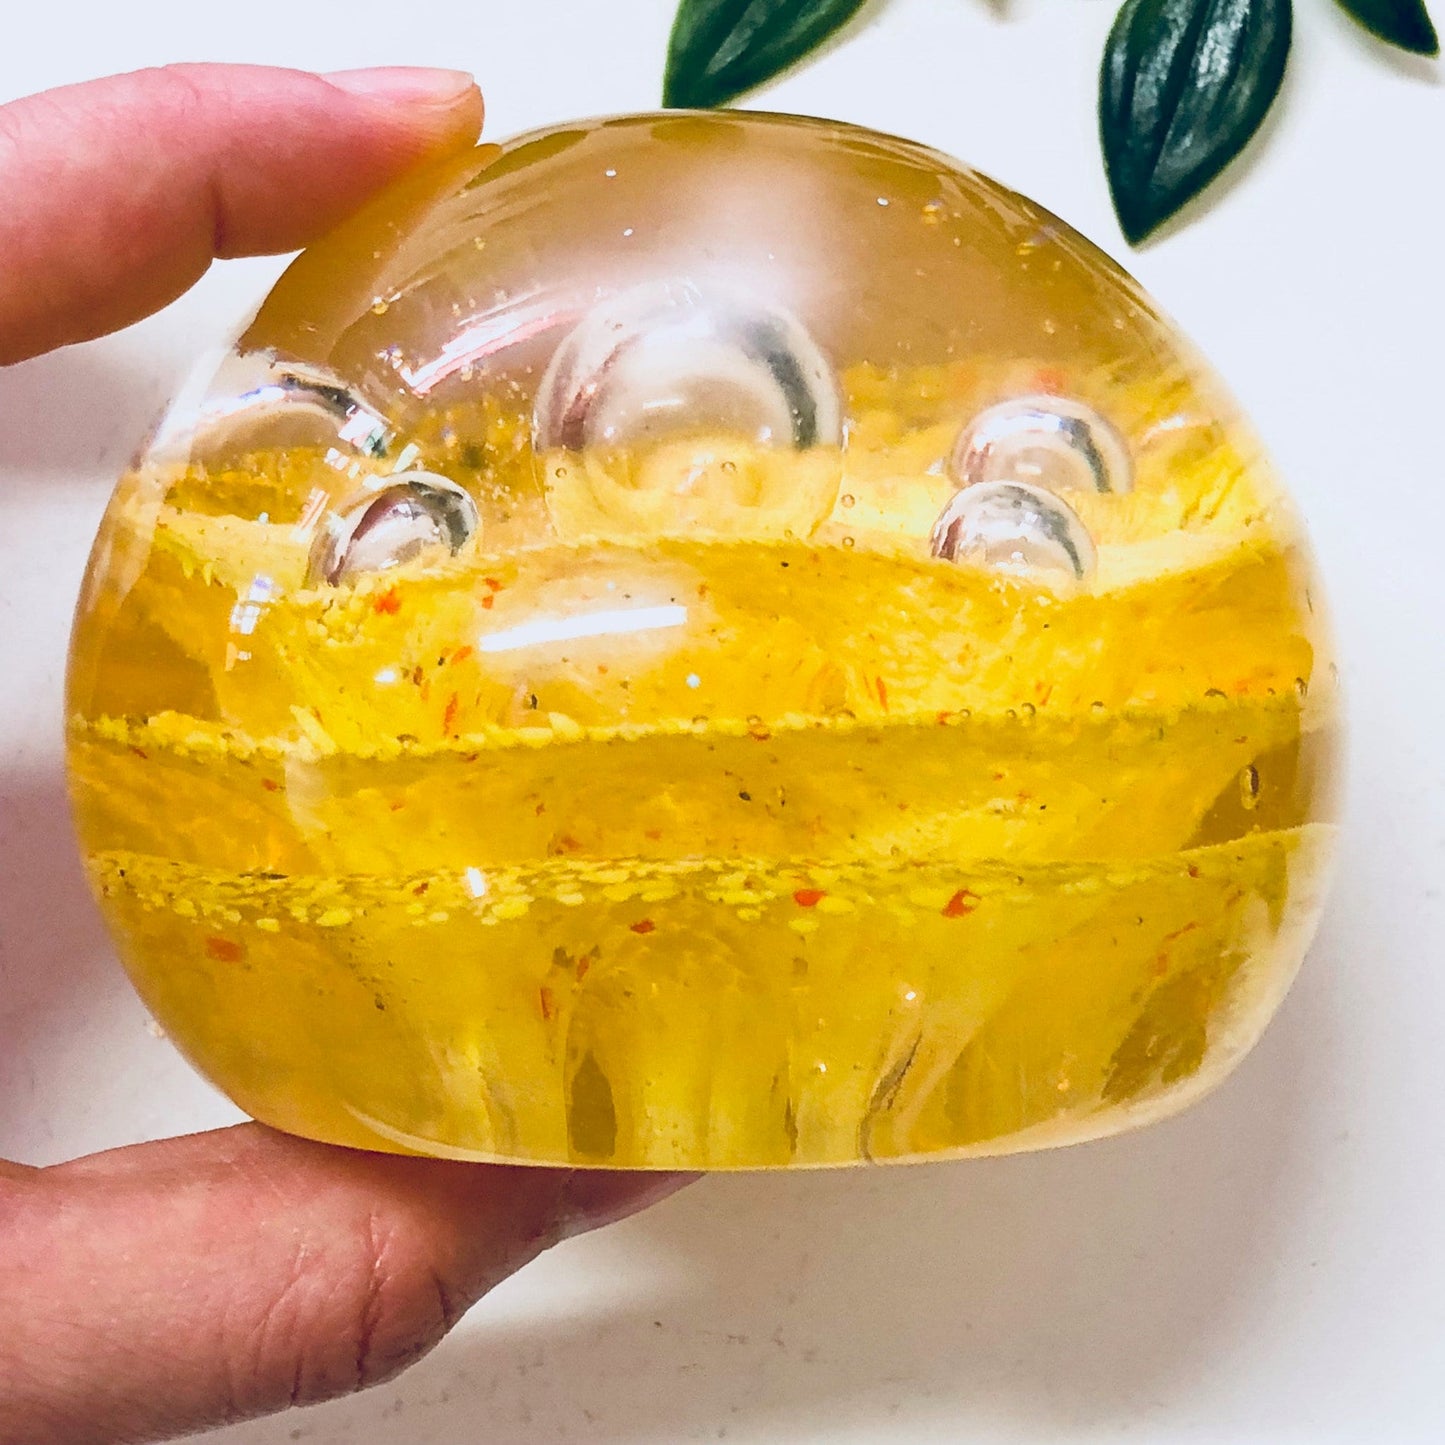 Yellow and orange speckled glass paperweight with colorful design held in hand against a white background with green leaves, vintage office decor.